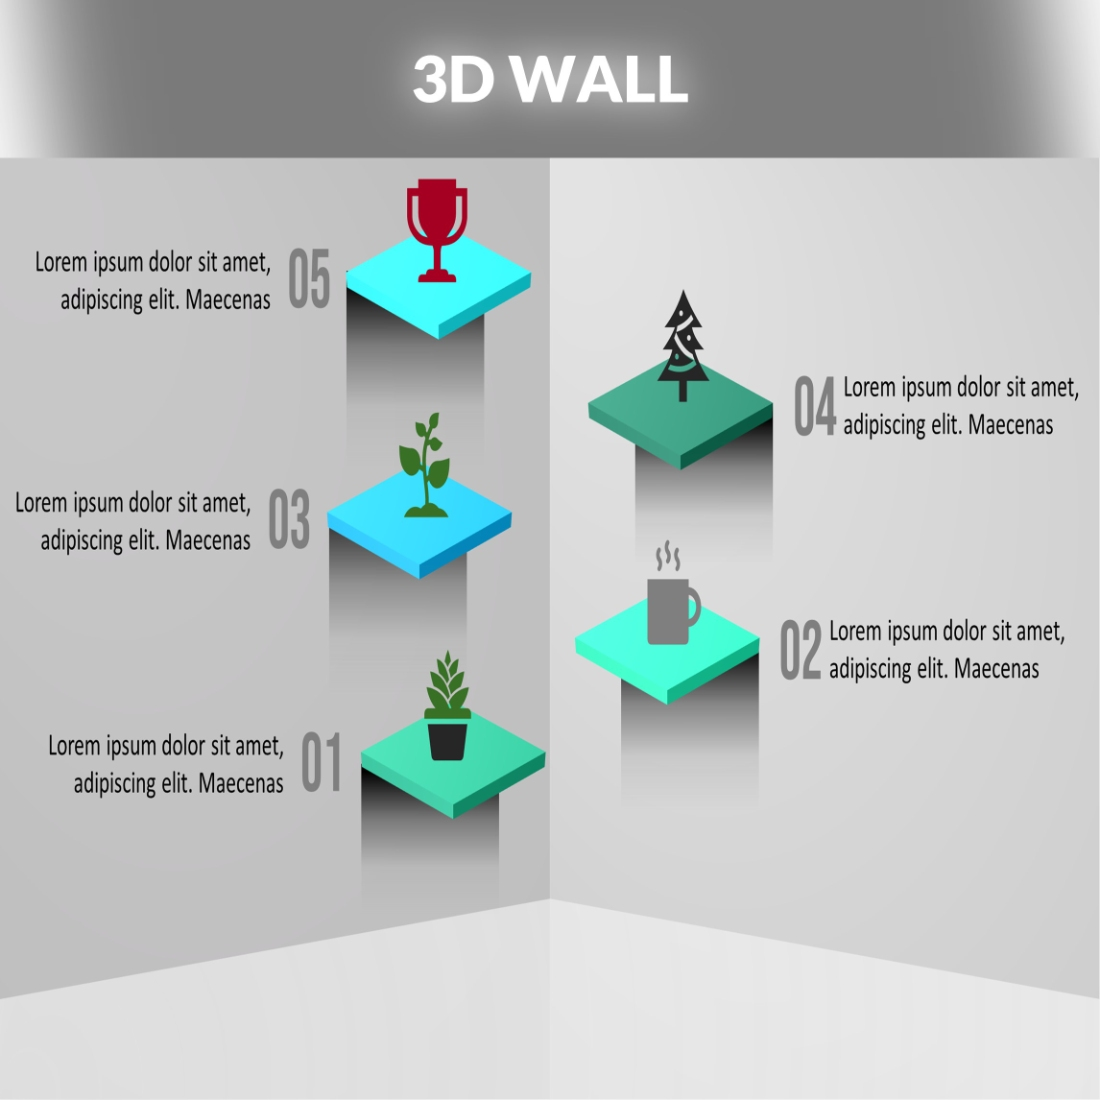 Creative 3D WALL ILLUSTRATION WALL Illustration 3D WALL cover image.